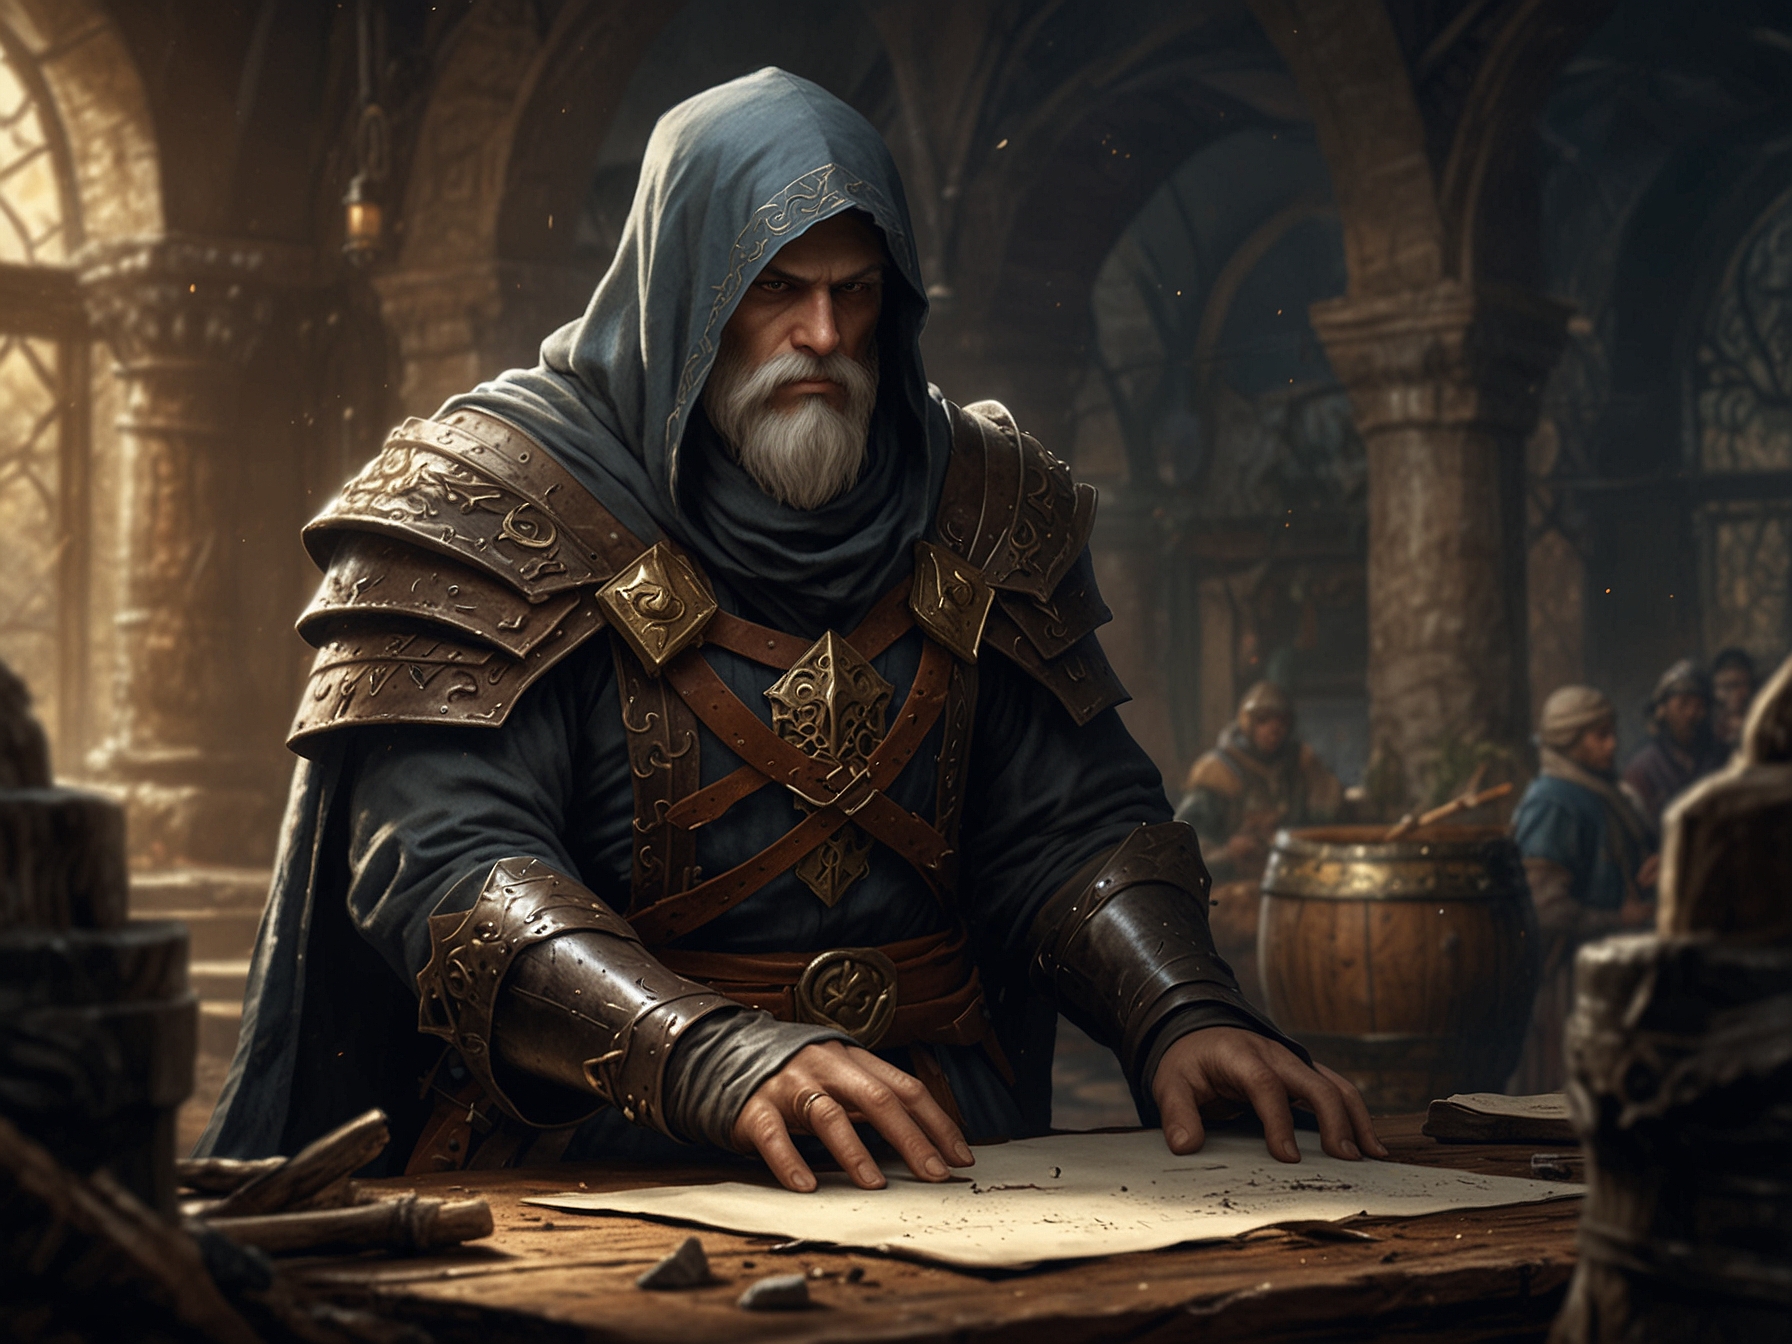 Illustration of a player character in Elden Ring gathering new crafting materials, showcasing the importance of preparation and resource collection for the upcoming DLC.